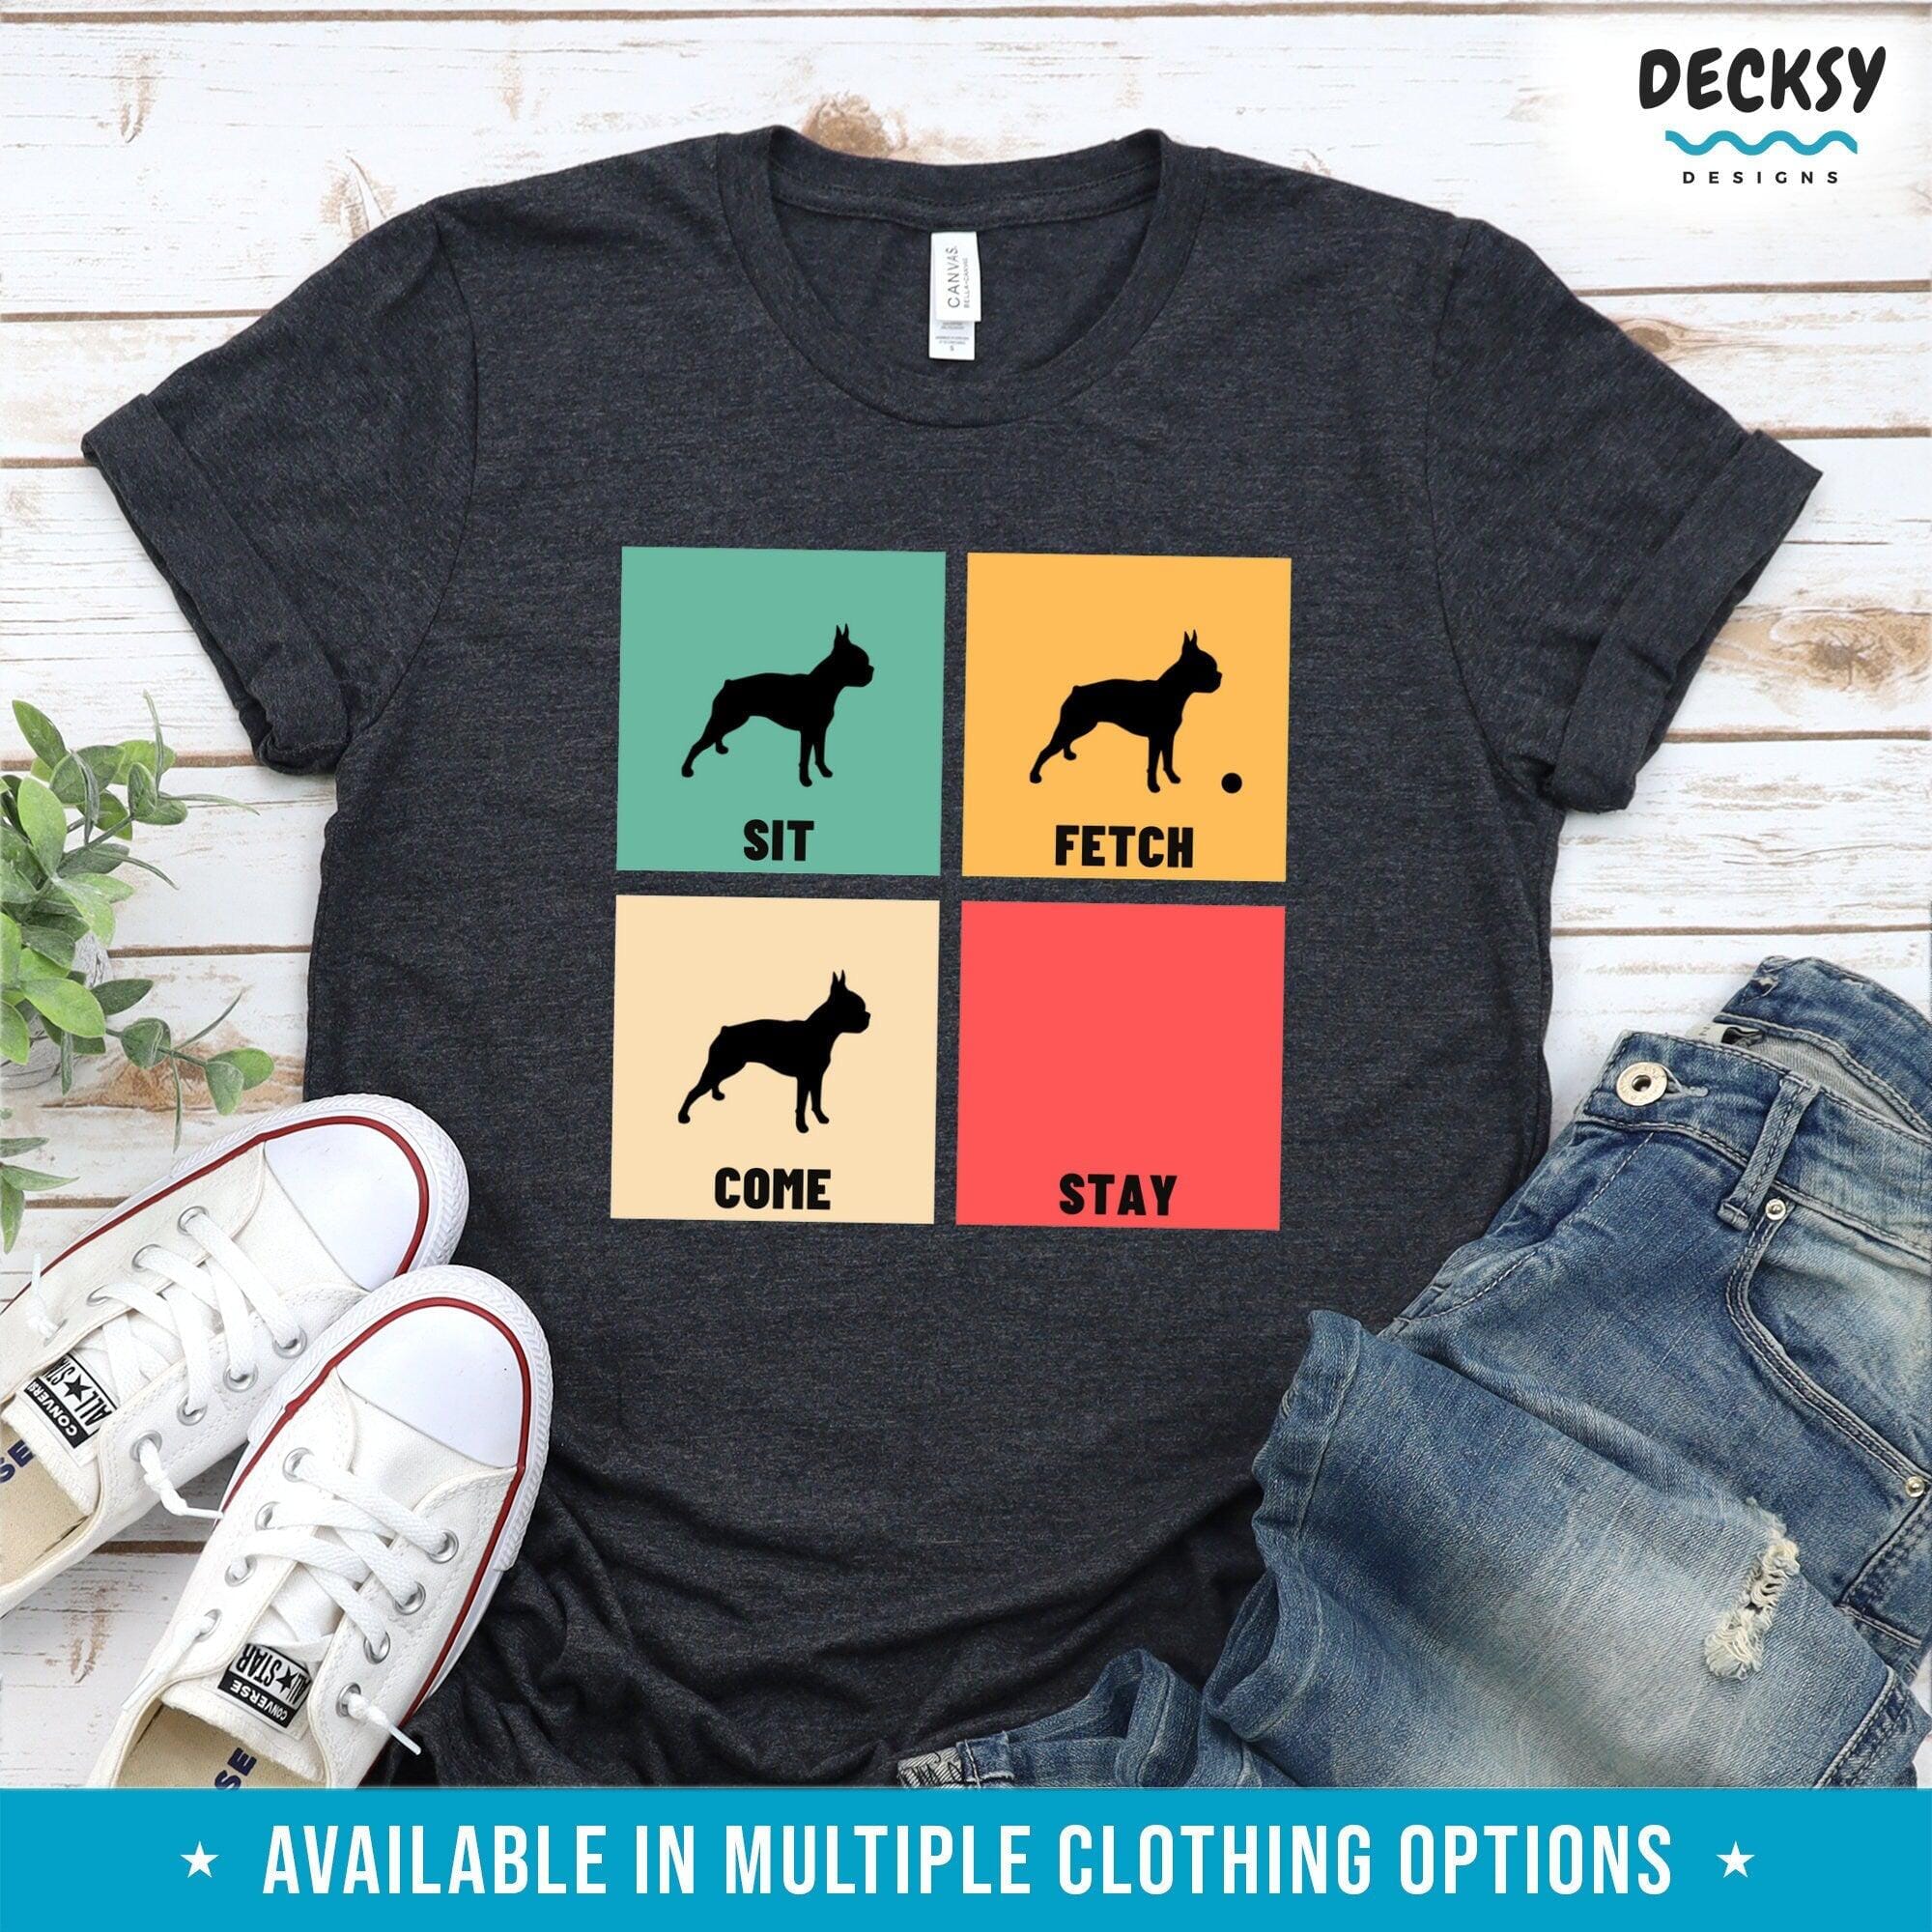 Boston Terrier Shirt, Bostie Lover Gift-Clothing:Gender-Neutral Adult Clothing:Tops & Tees:T-shirts:Graphic Tees-DecksyDesigns